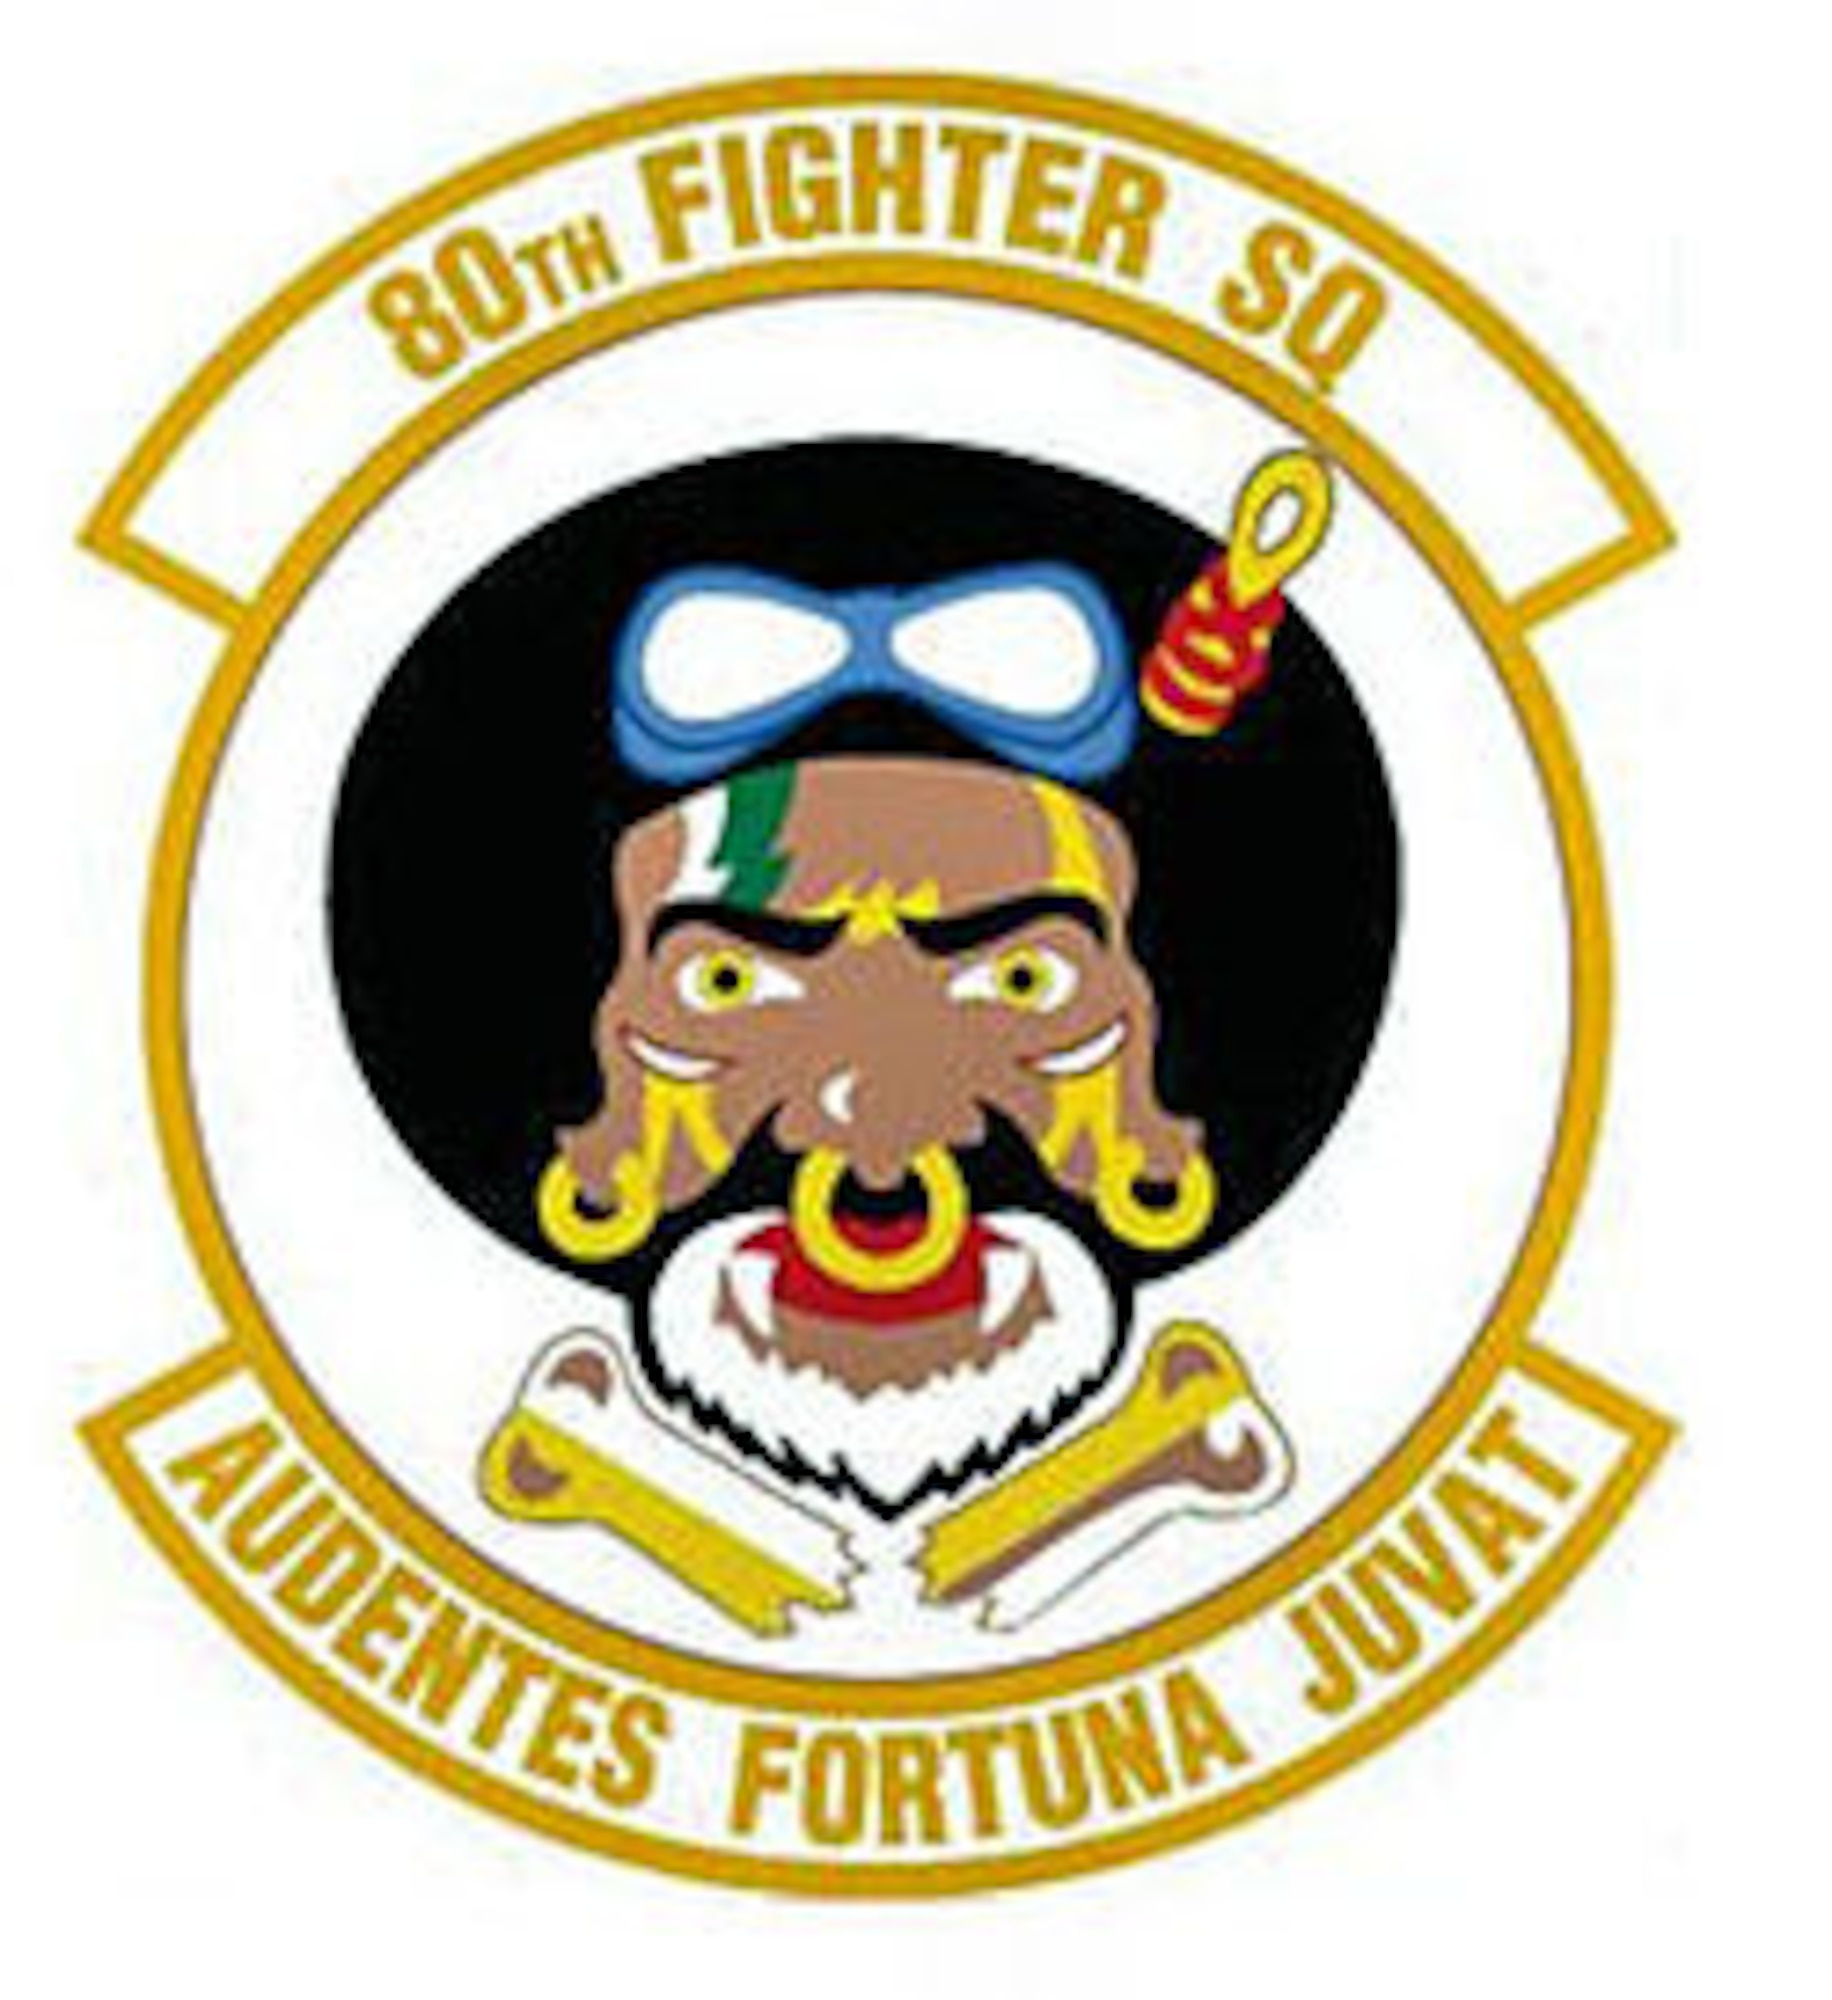 The 80th Fighter Squadron flies the F-16 Fighting Falcon out of Kunsan Air Base, Republic of Korea, and is one of two fighter squadrons assigned to the 8th Fighter Wing, the Wolf Pack. 

